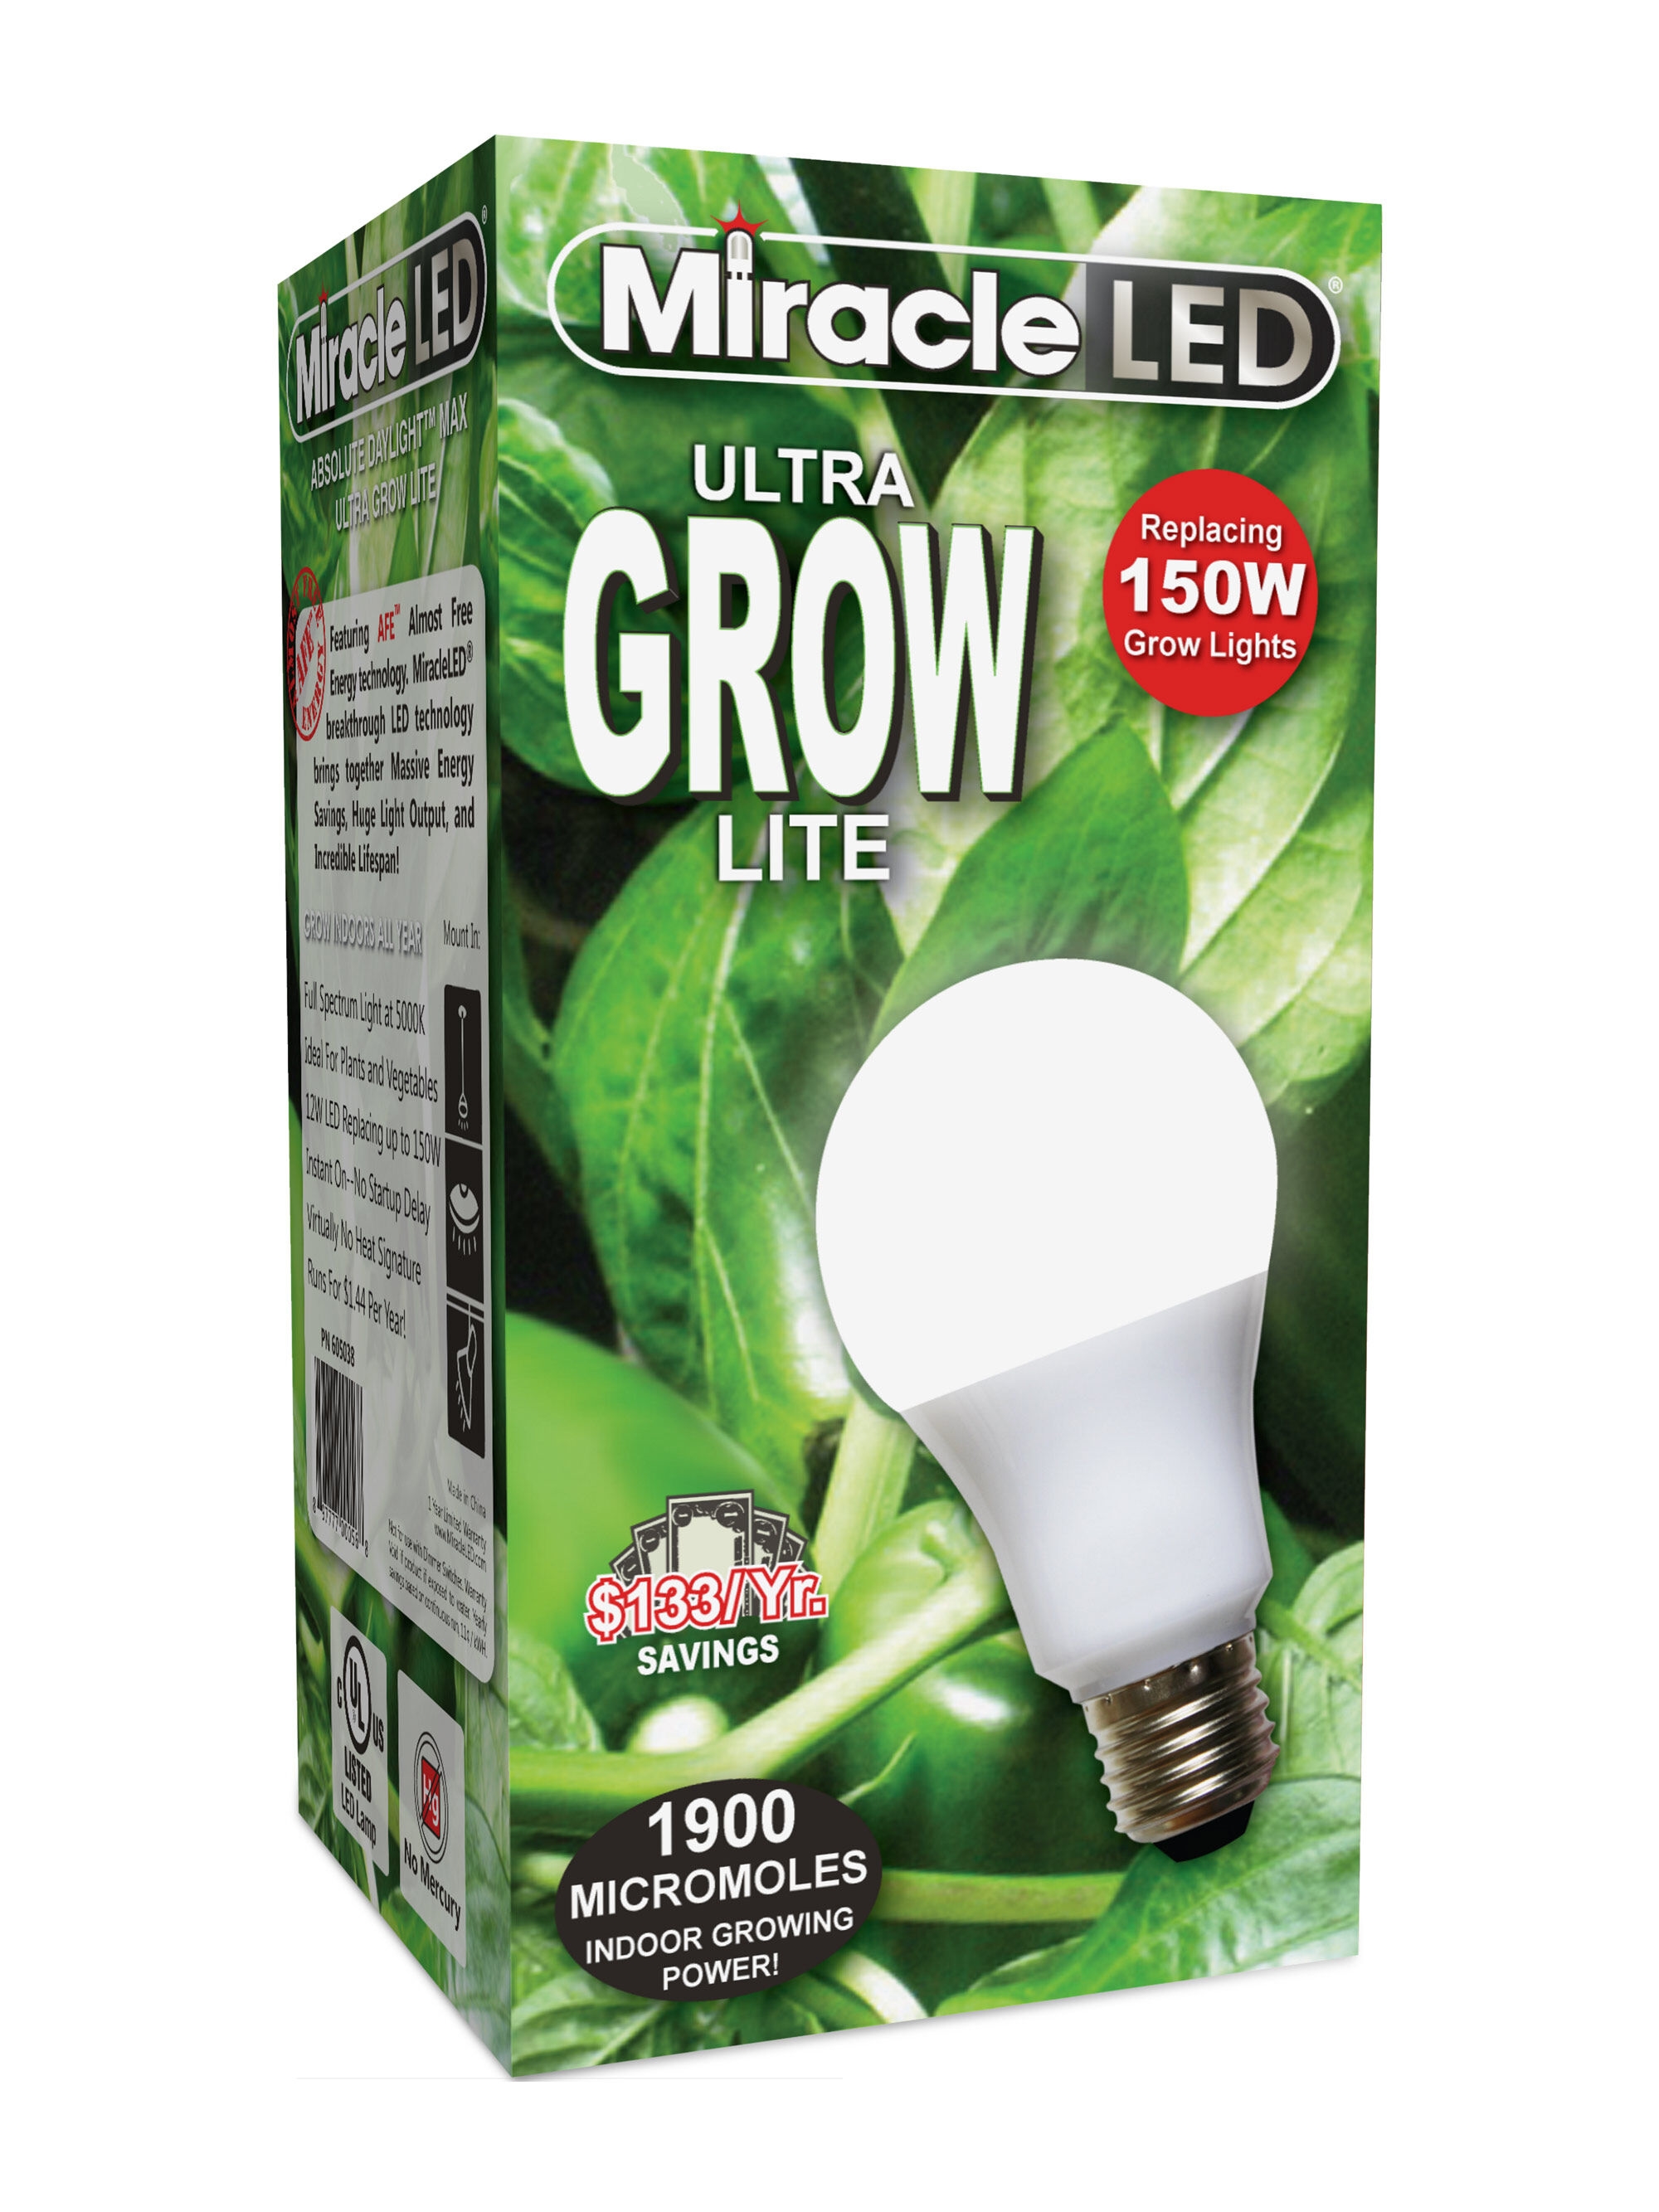 Miracle LED® Ultra Grow Light Bulb - Free Shipping on $125+ Orders